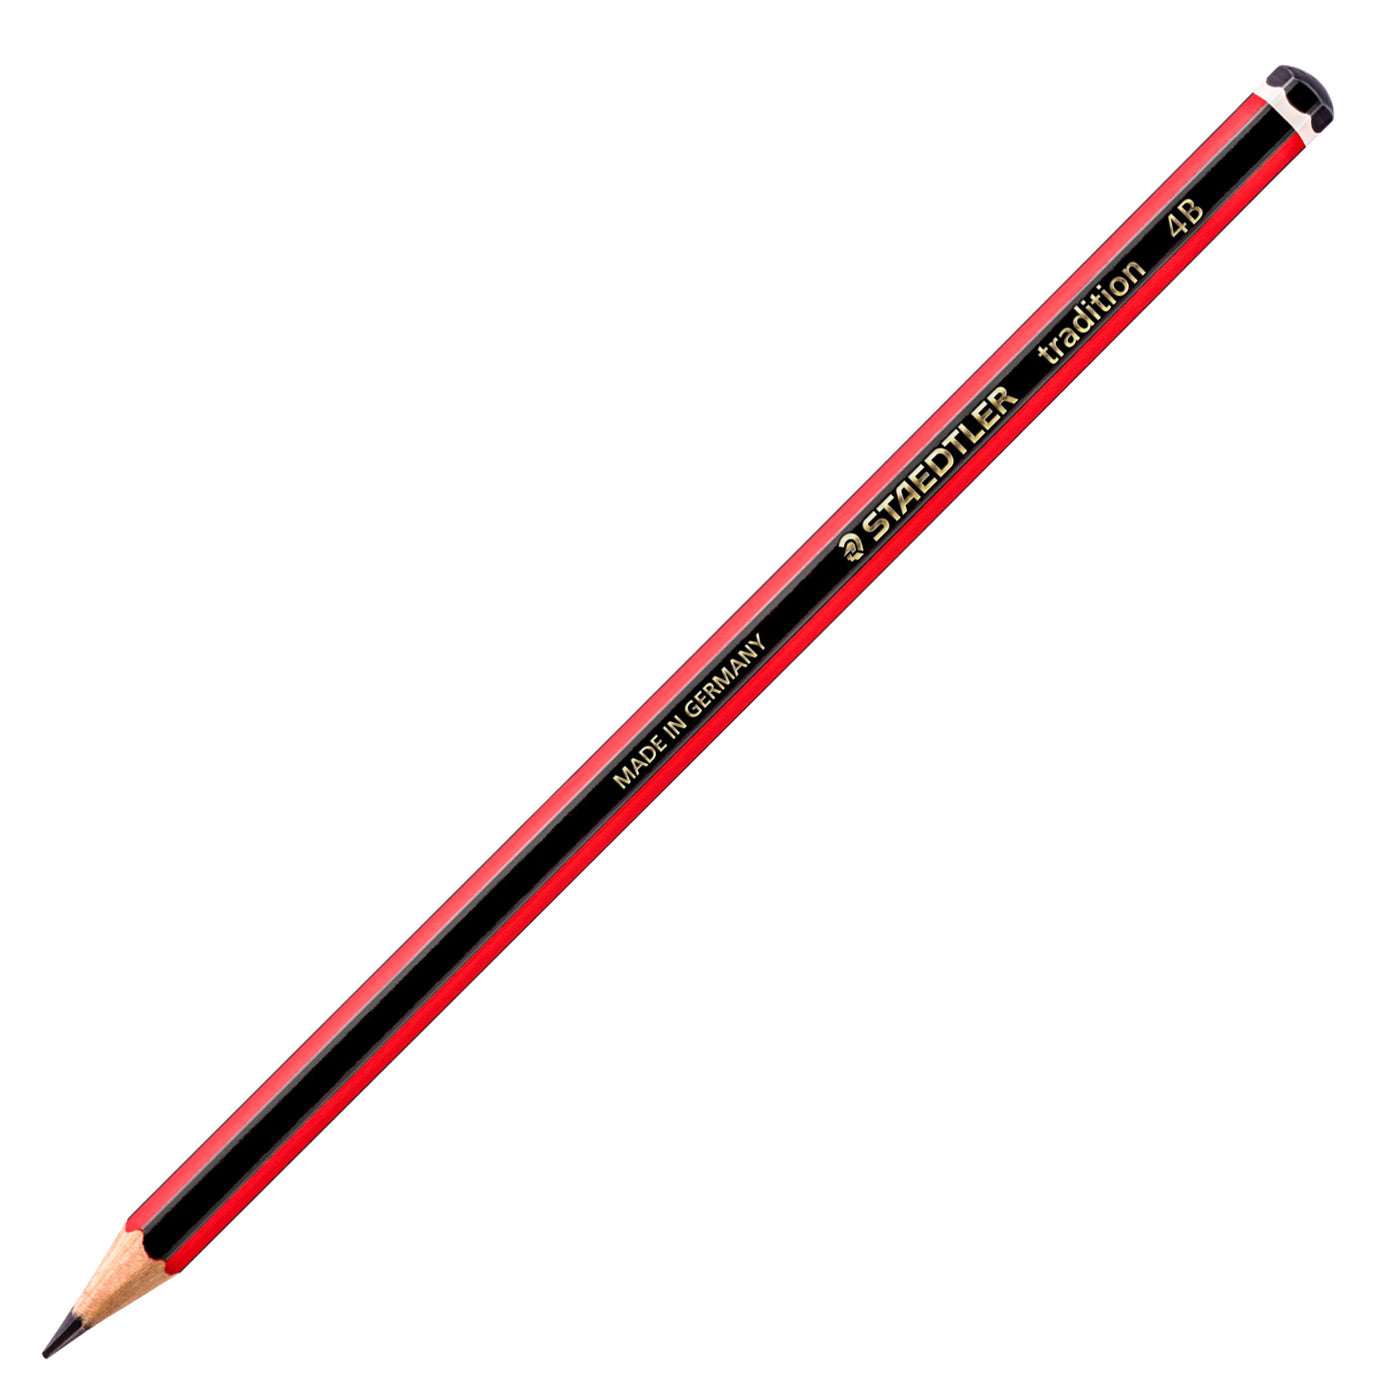 Staedtler Tradition 110-4B Pencil 4B